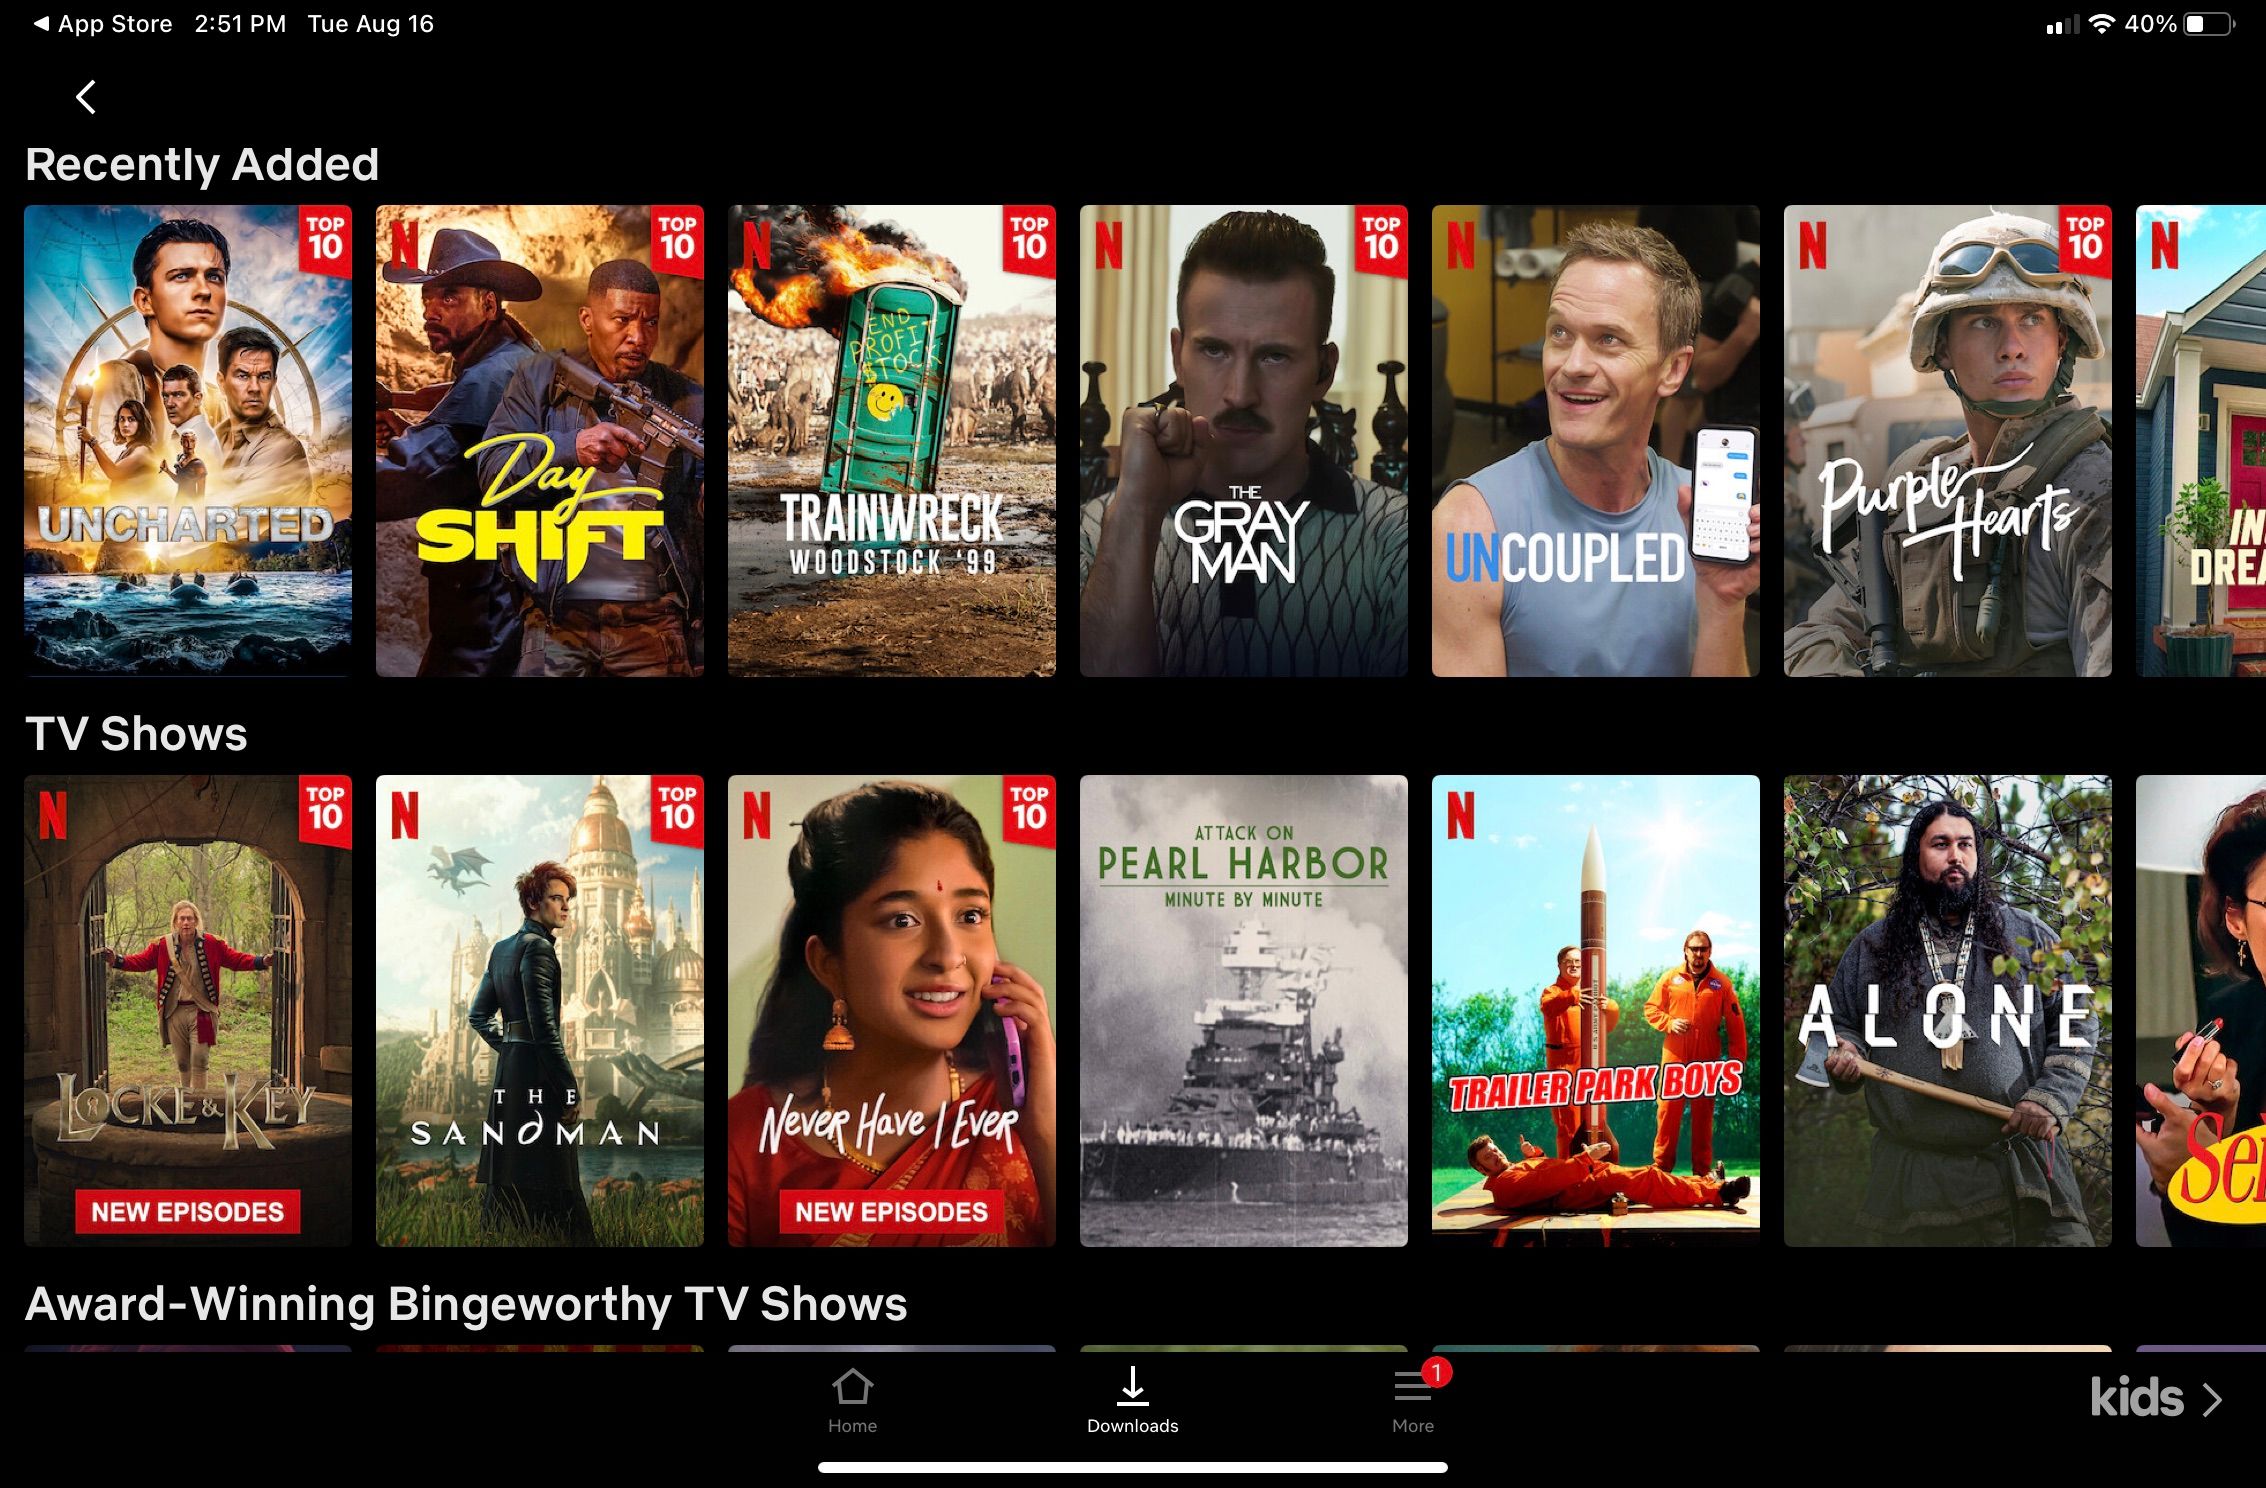 Netflix Download Content Options- Includes Recently Added and TV Shows section